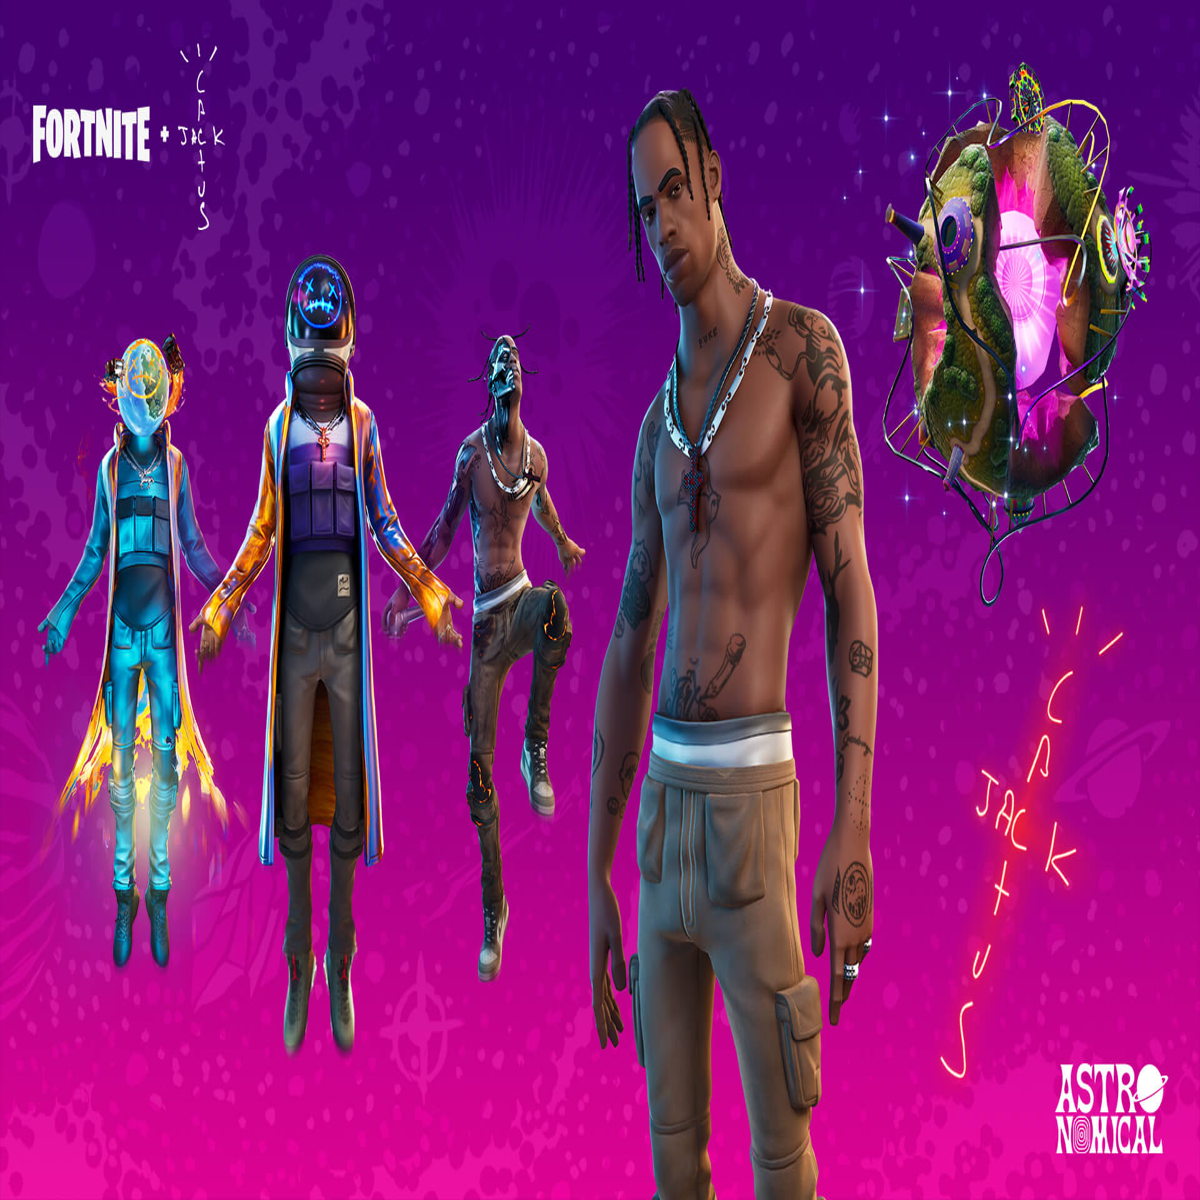 Astroworld: Travis Scott emote pulled from Fortnite video game in